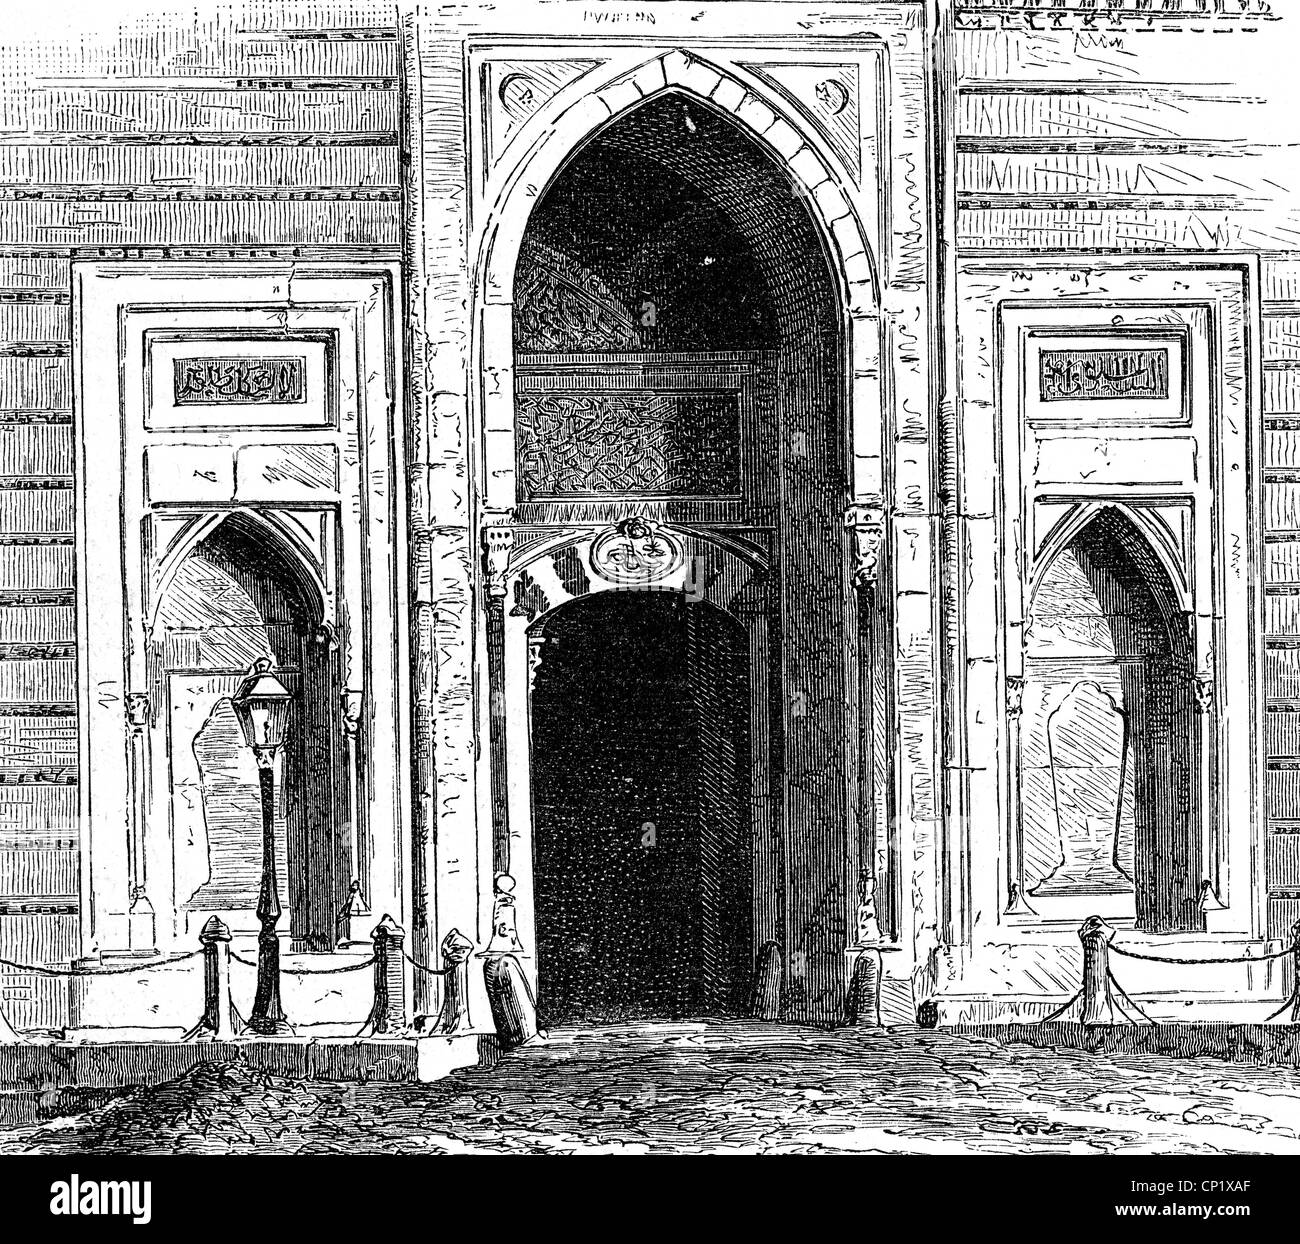 Turkey, Istanbul, Topkapi palace, 'High Porte', wood engraving, 2nd half 19th century, Additional-Rights-Clearences-Not Available Stock Photo